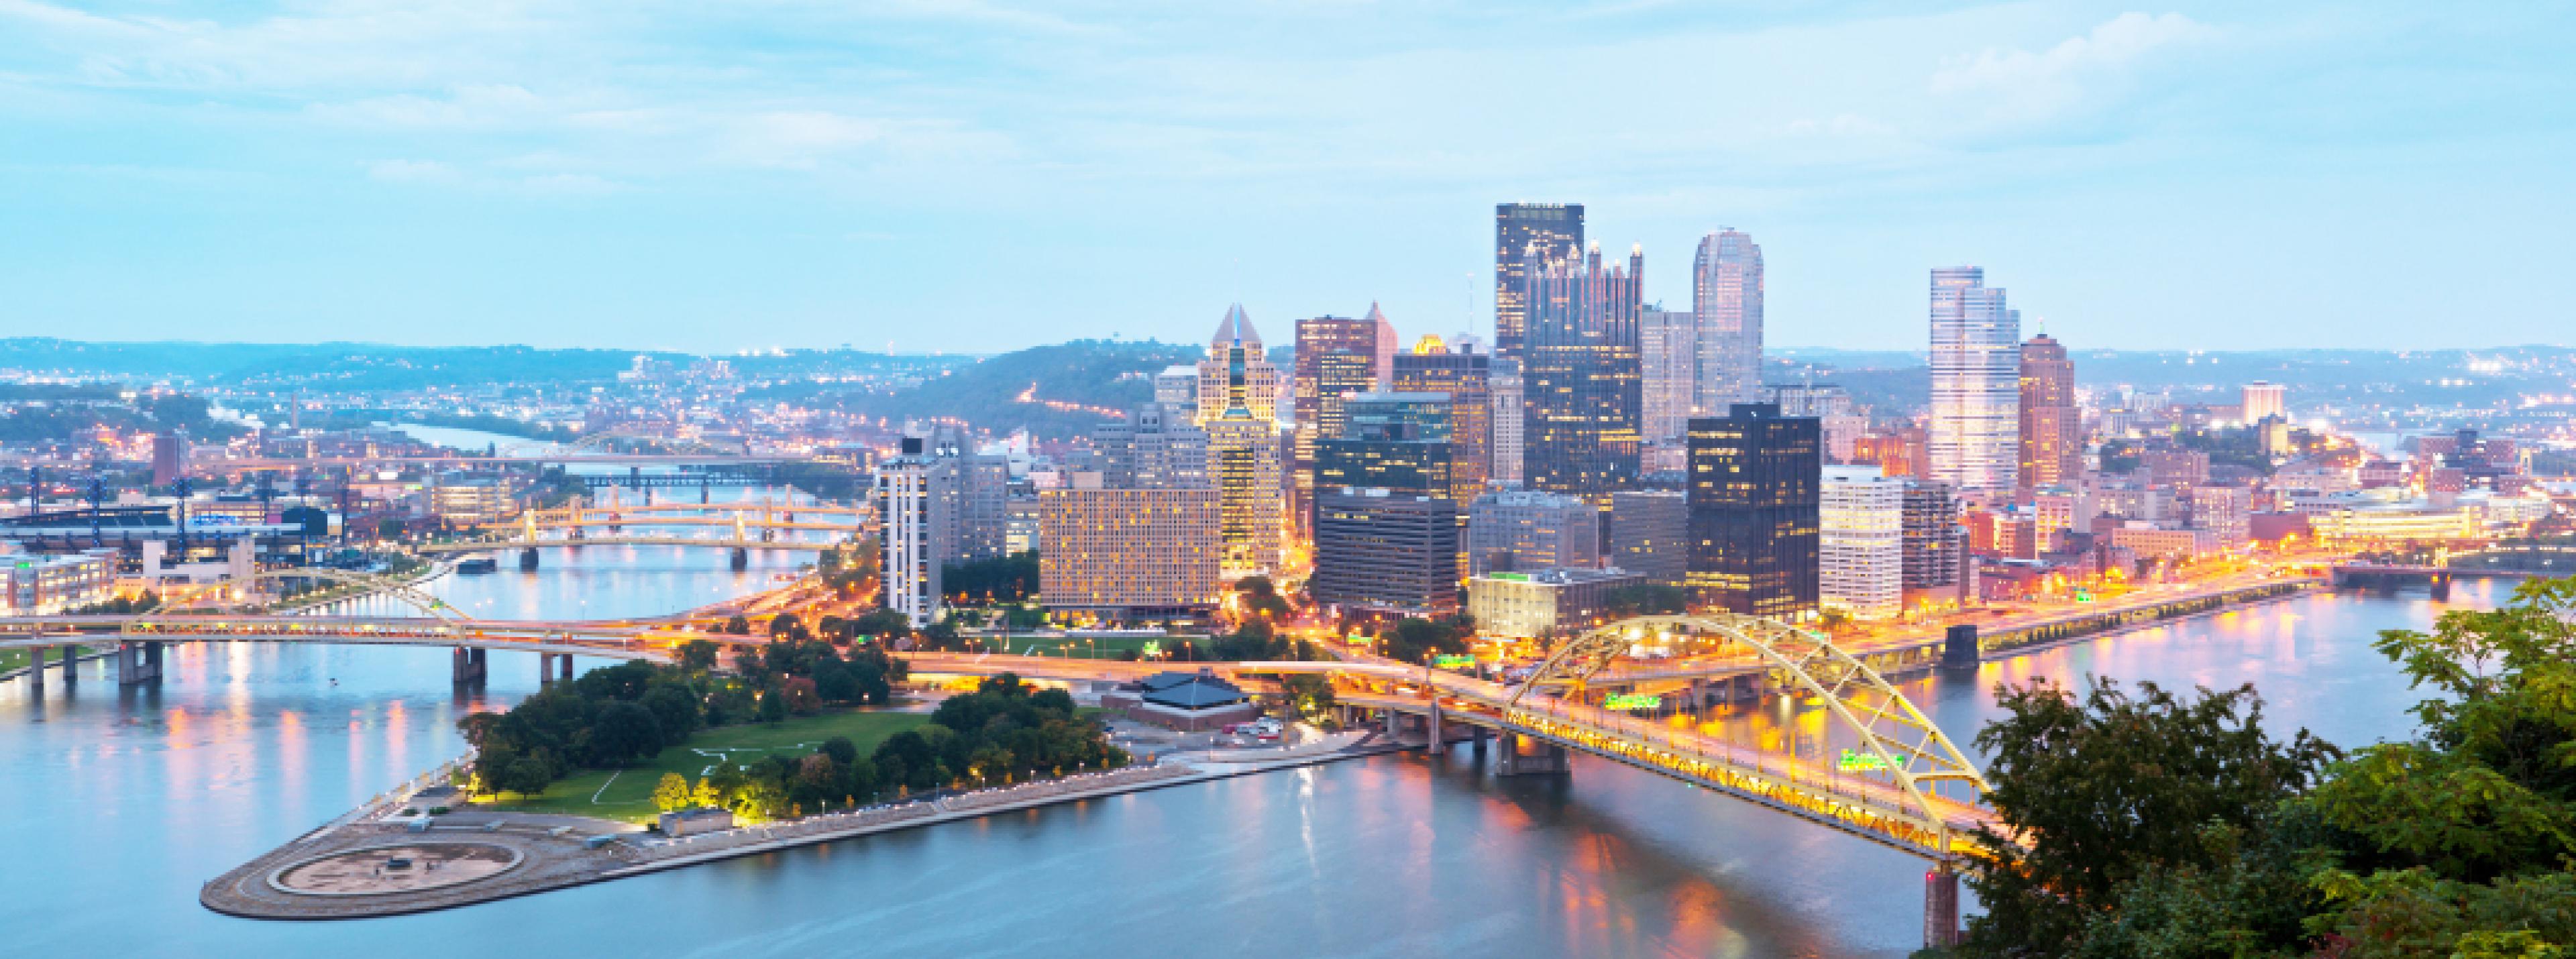 Pittsburgh downtown at dusk